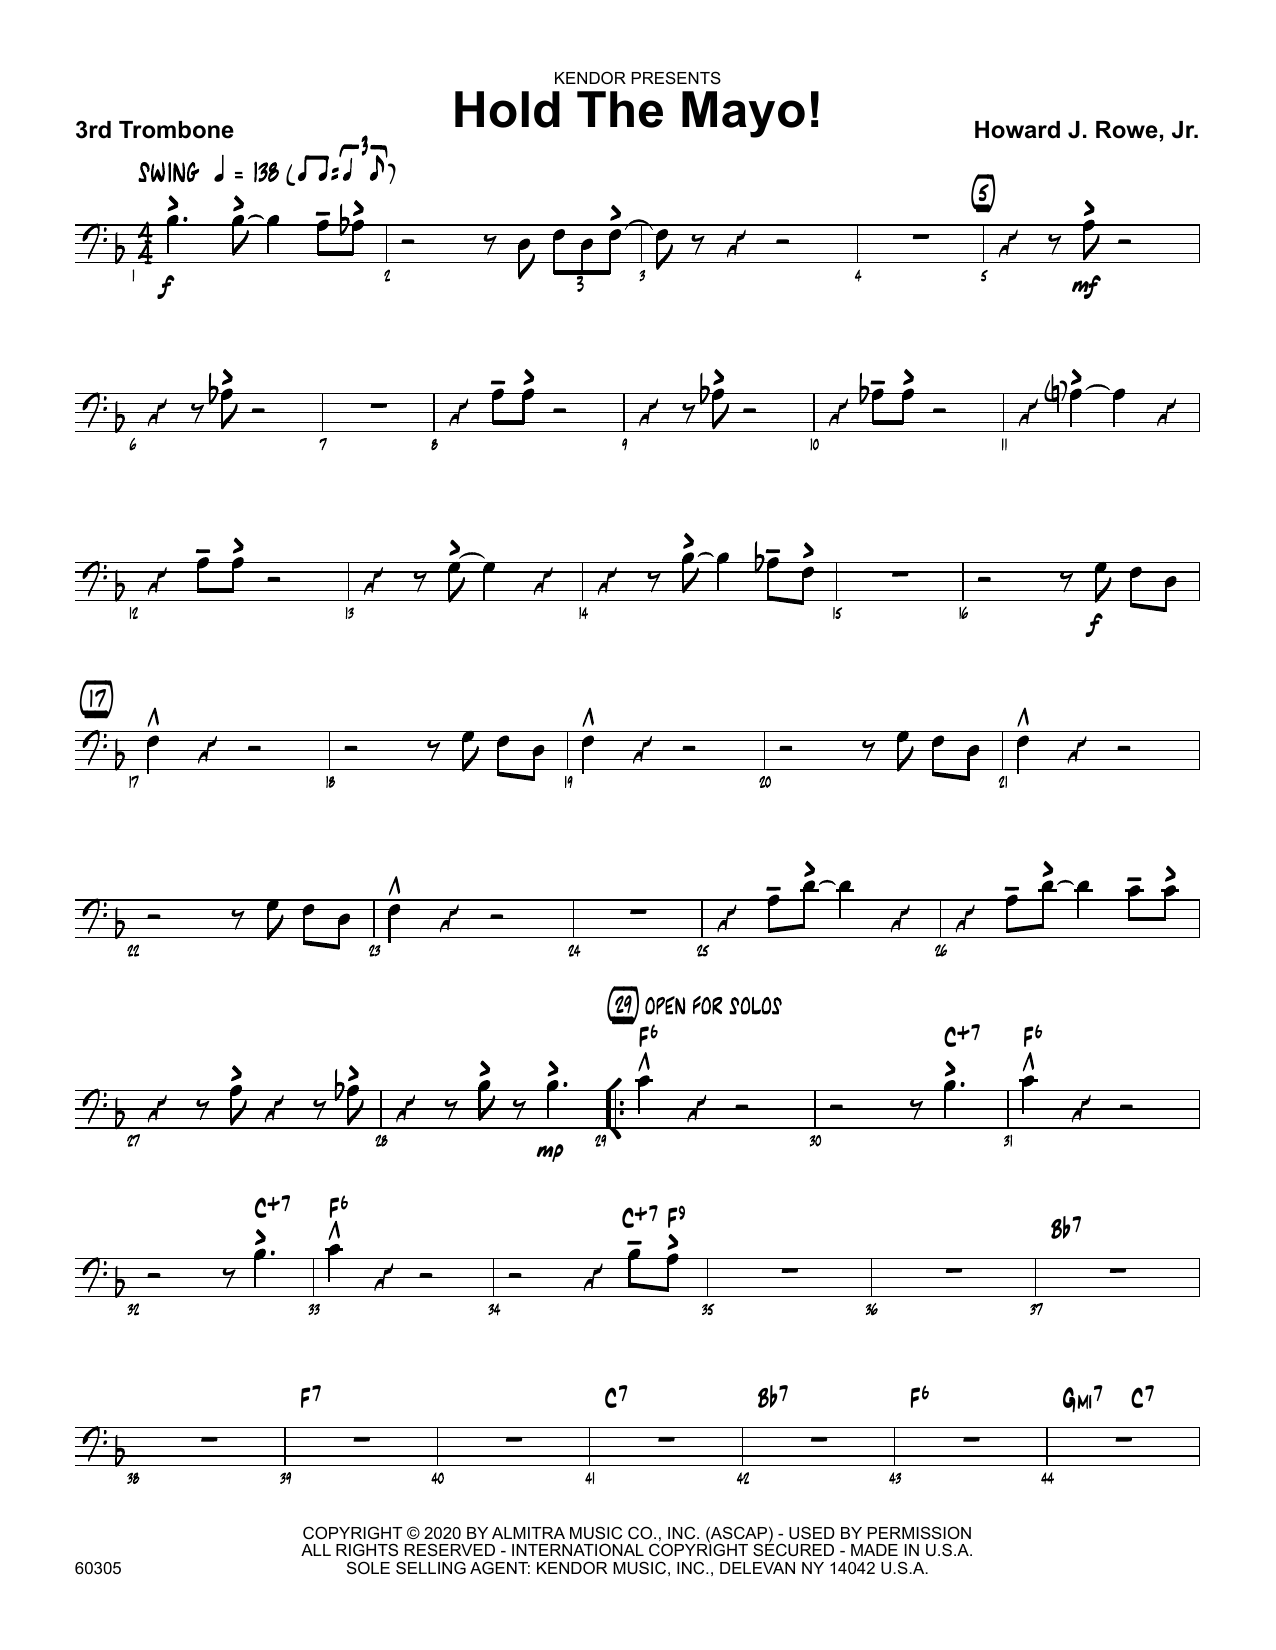 Download Howard Rowe Hold The Mayo! - 3rd Trombone Sheet Music